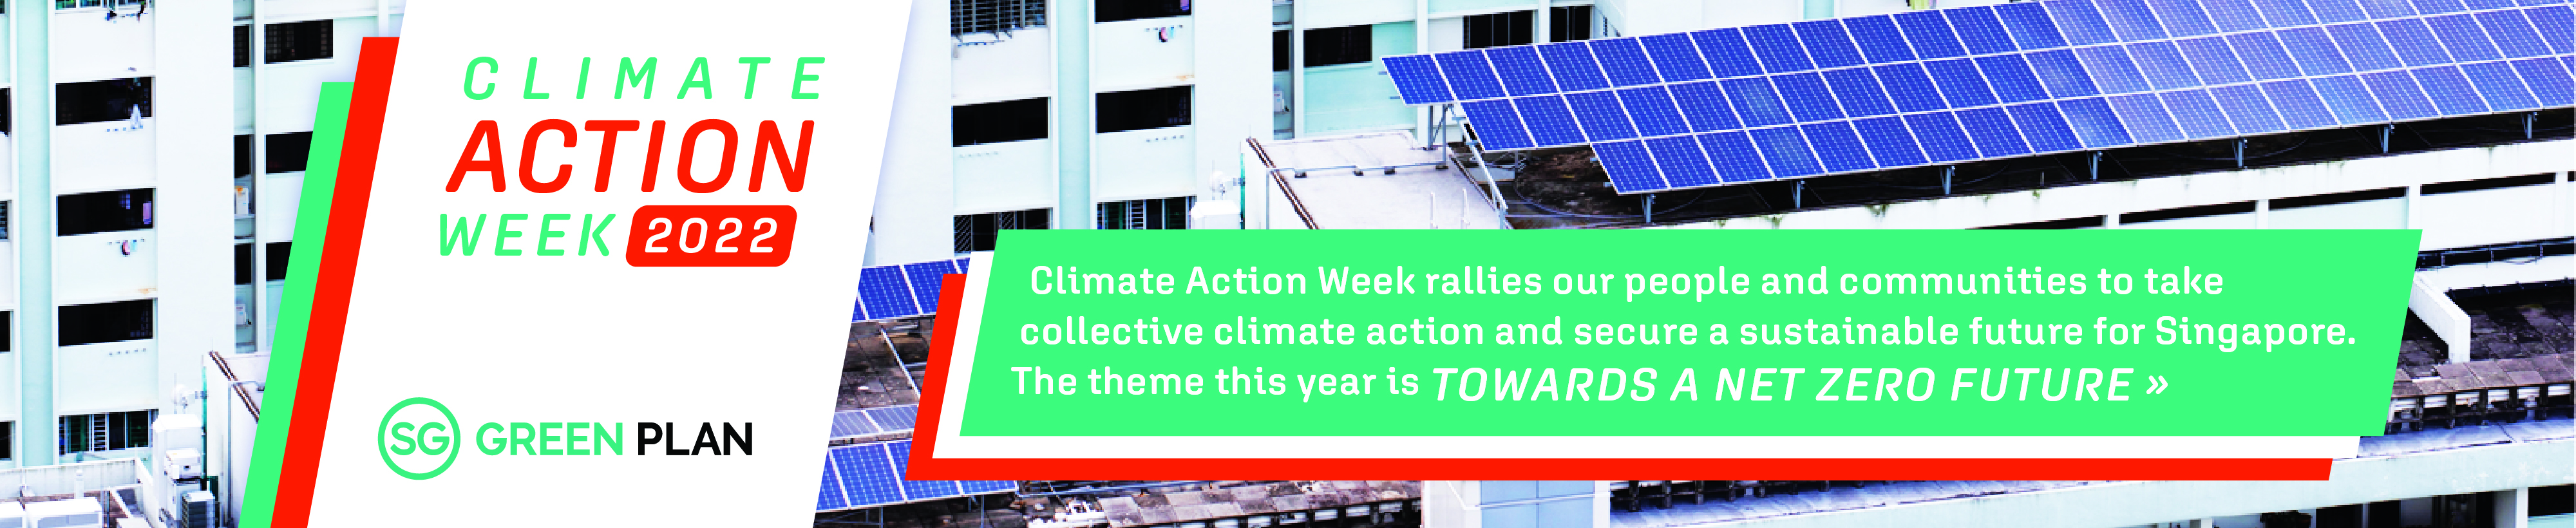 climate action week